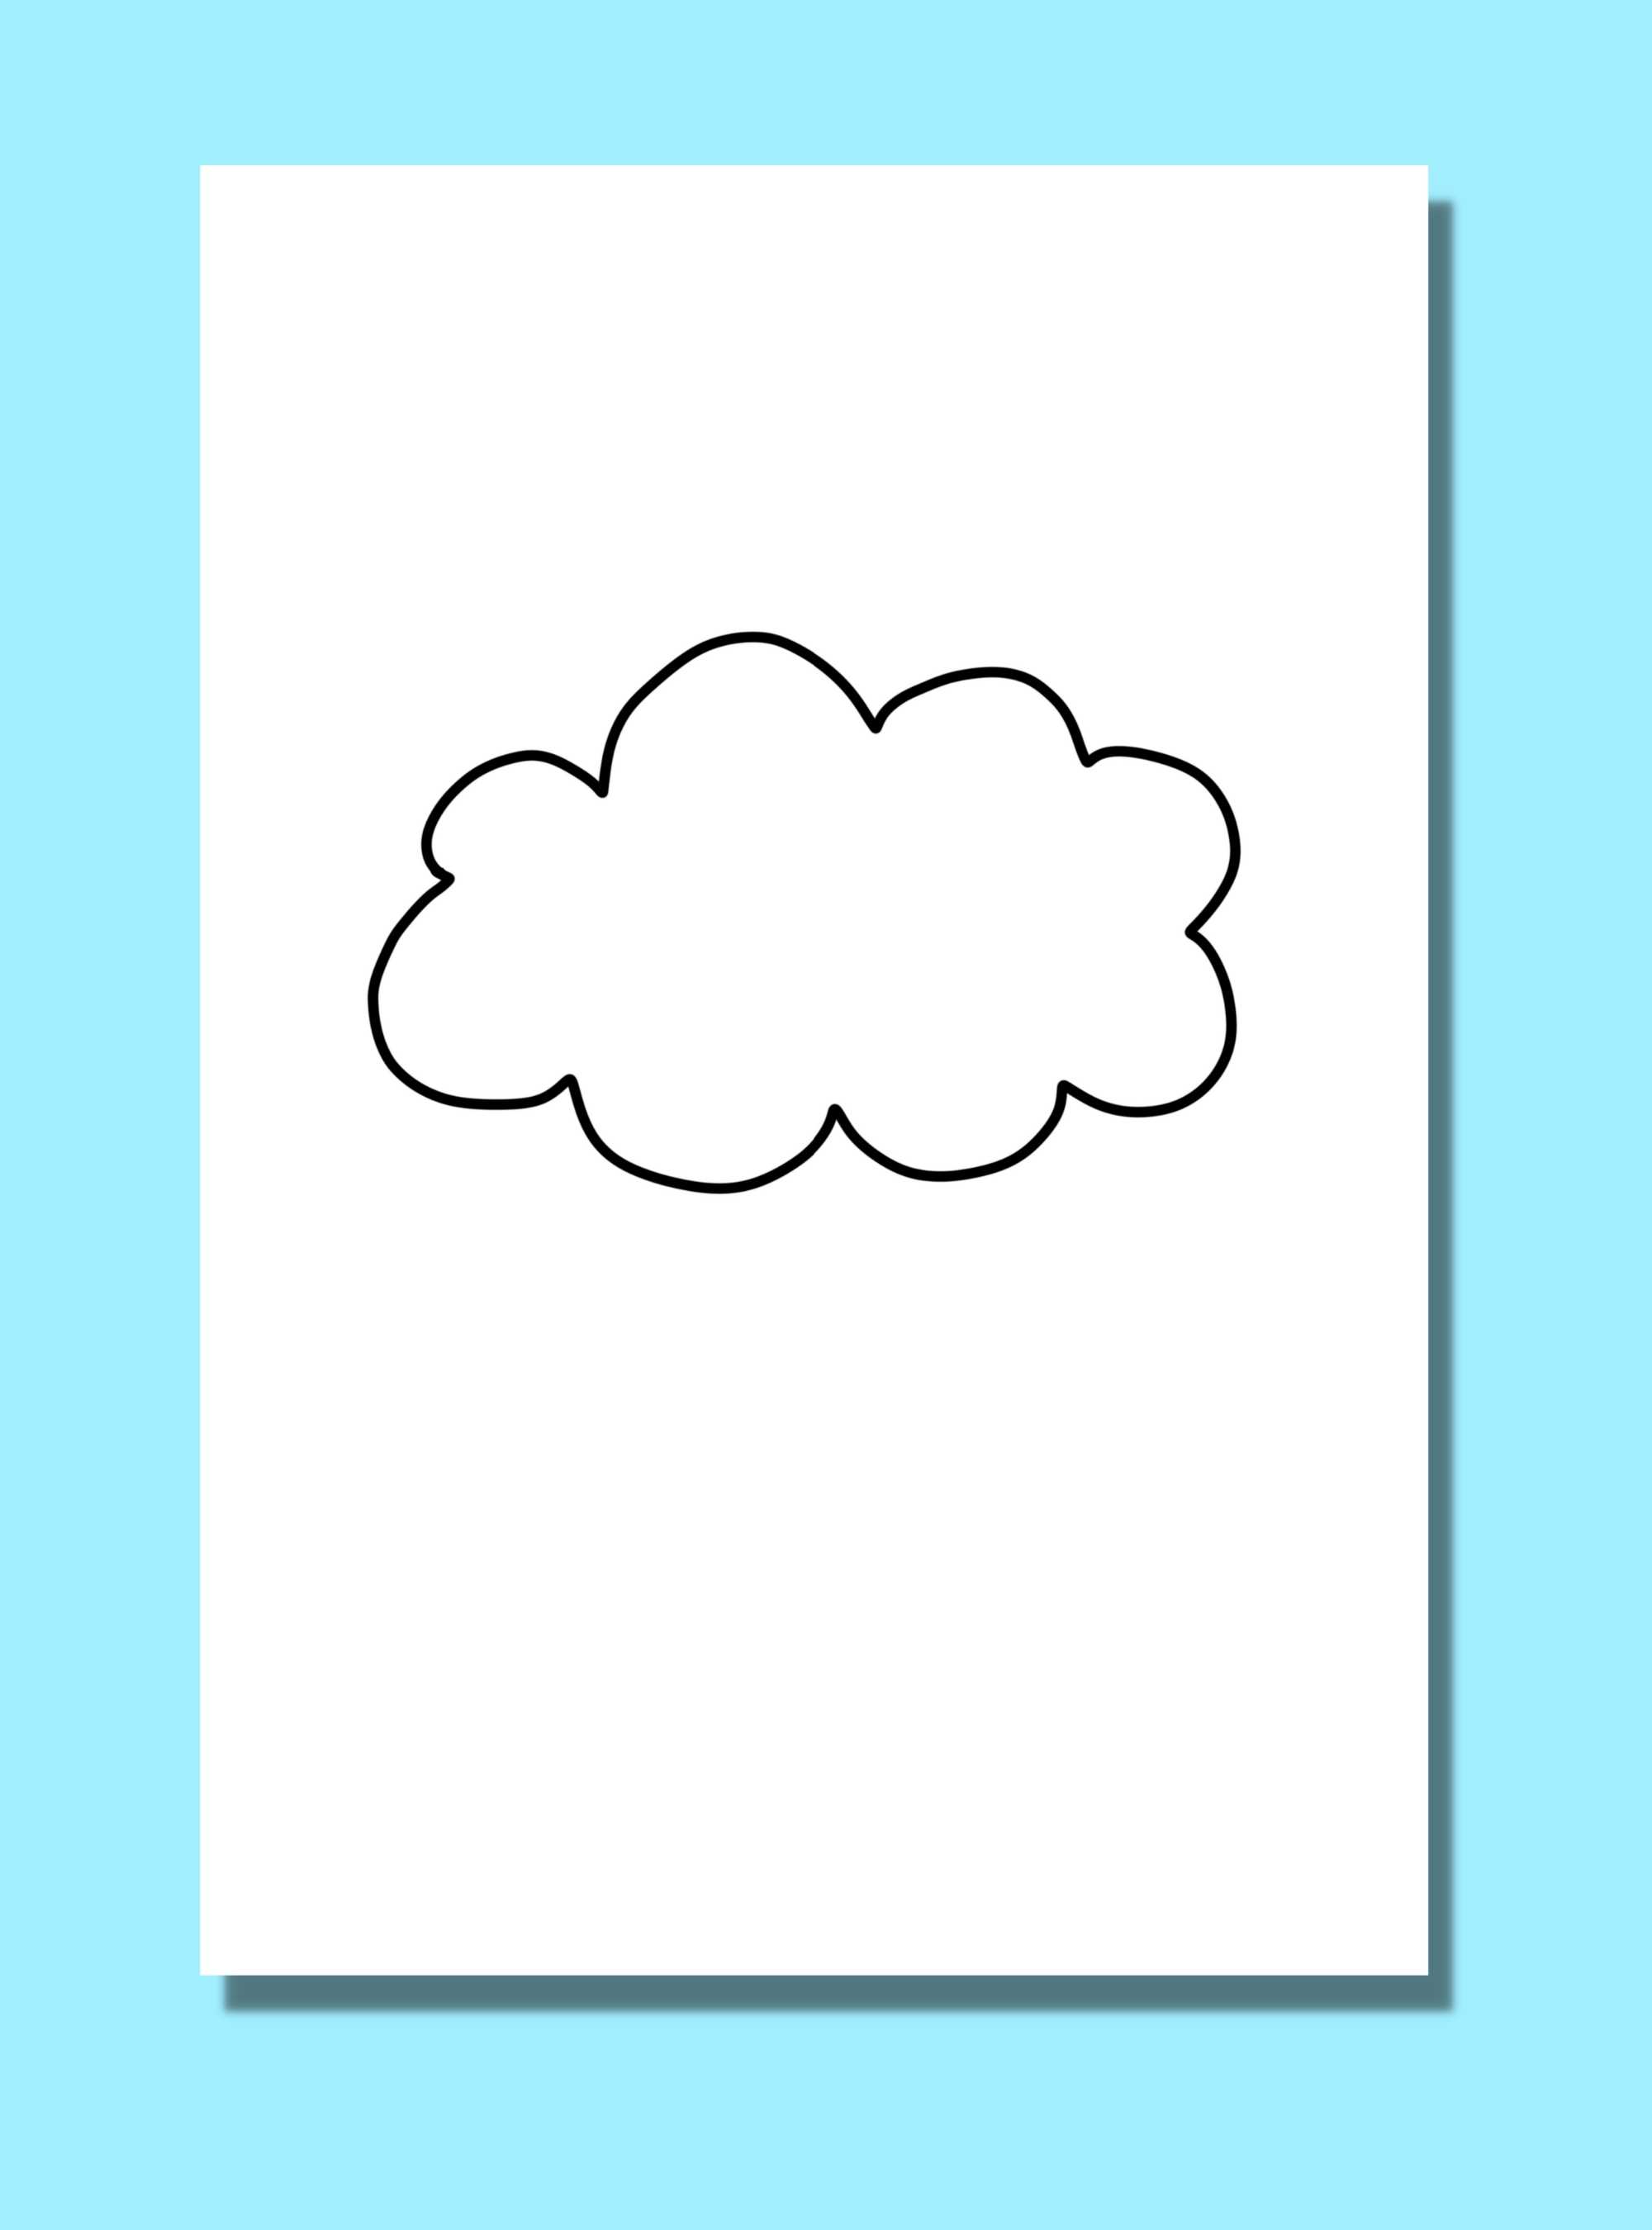 Looking for a Cloud Template? 10 Free Printable Cloud Templates for